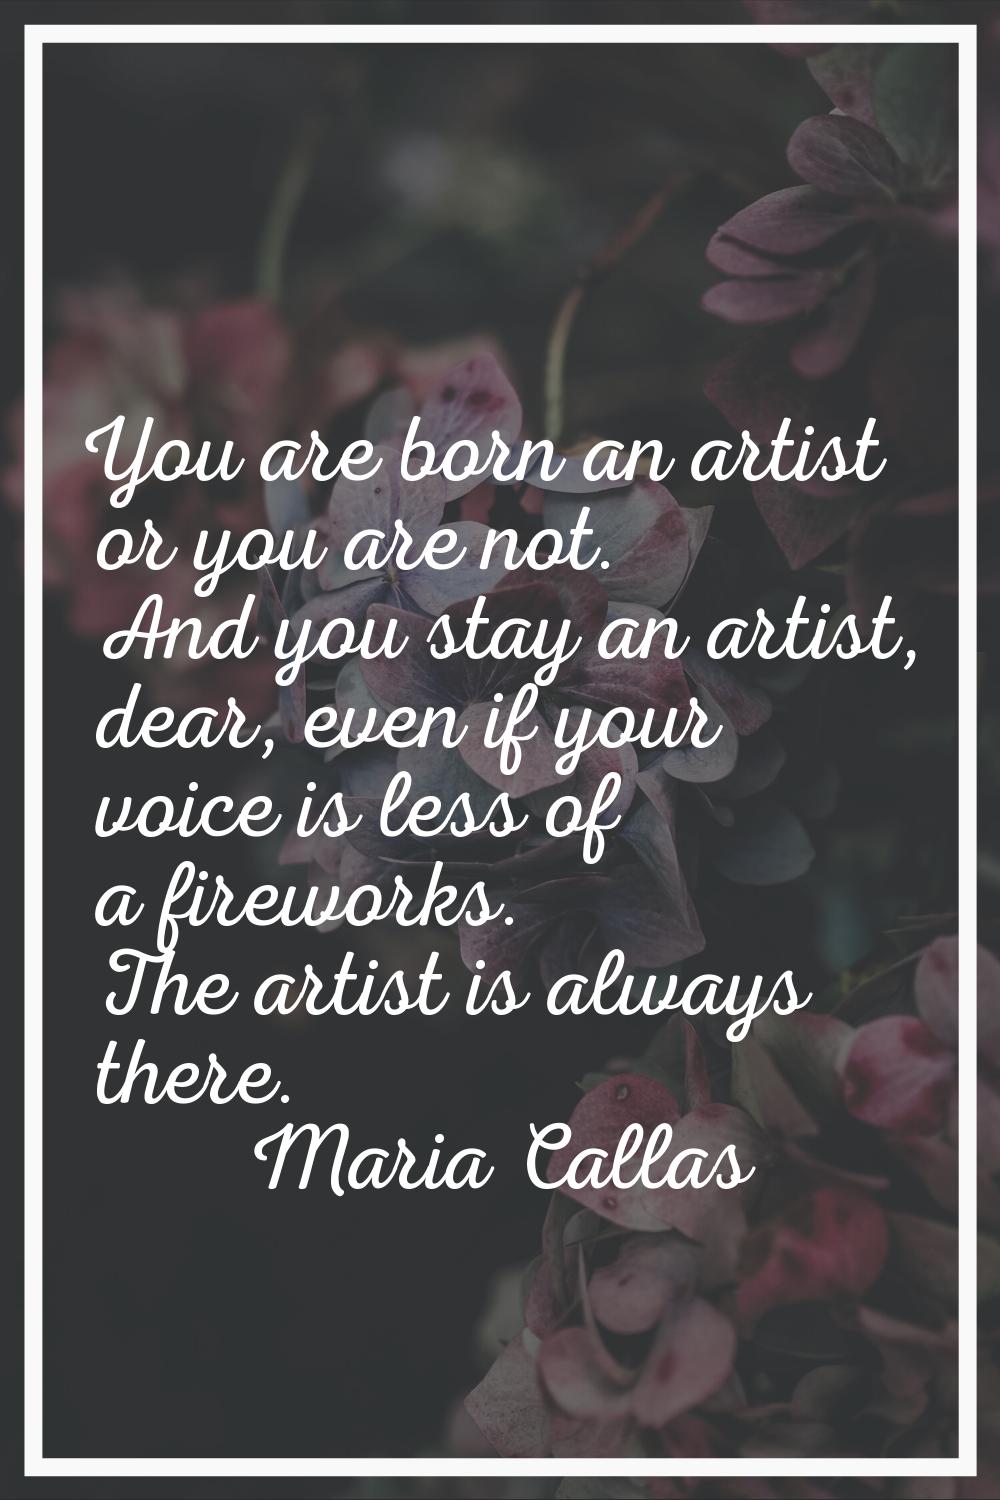 You are born an artist or you are not. And you stay an artist, dear, even if your voice is less of 